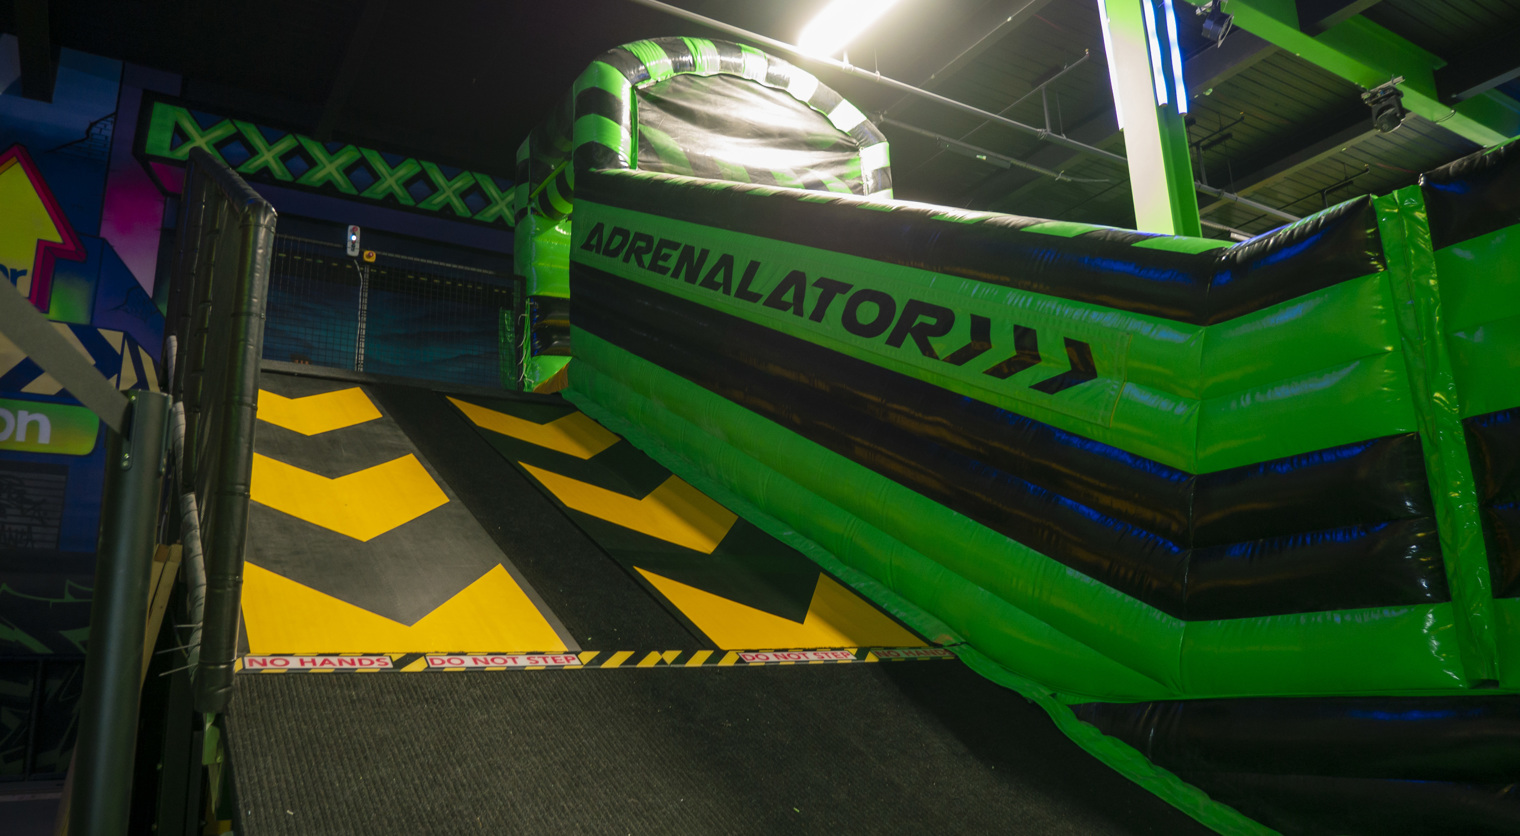 The Travelator at Flip Out UK